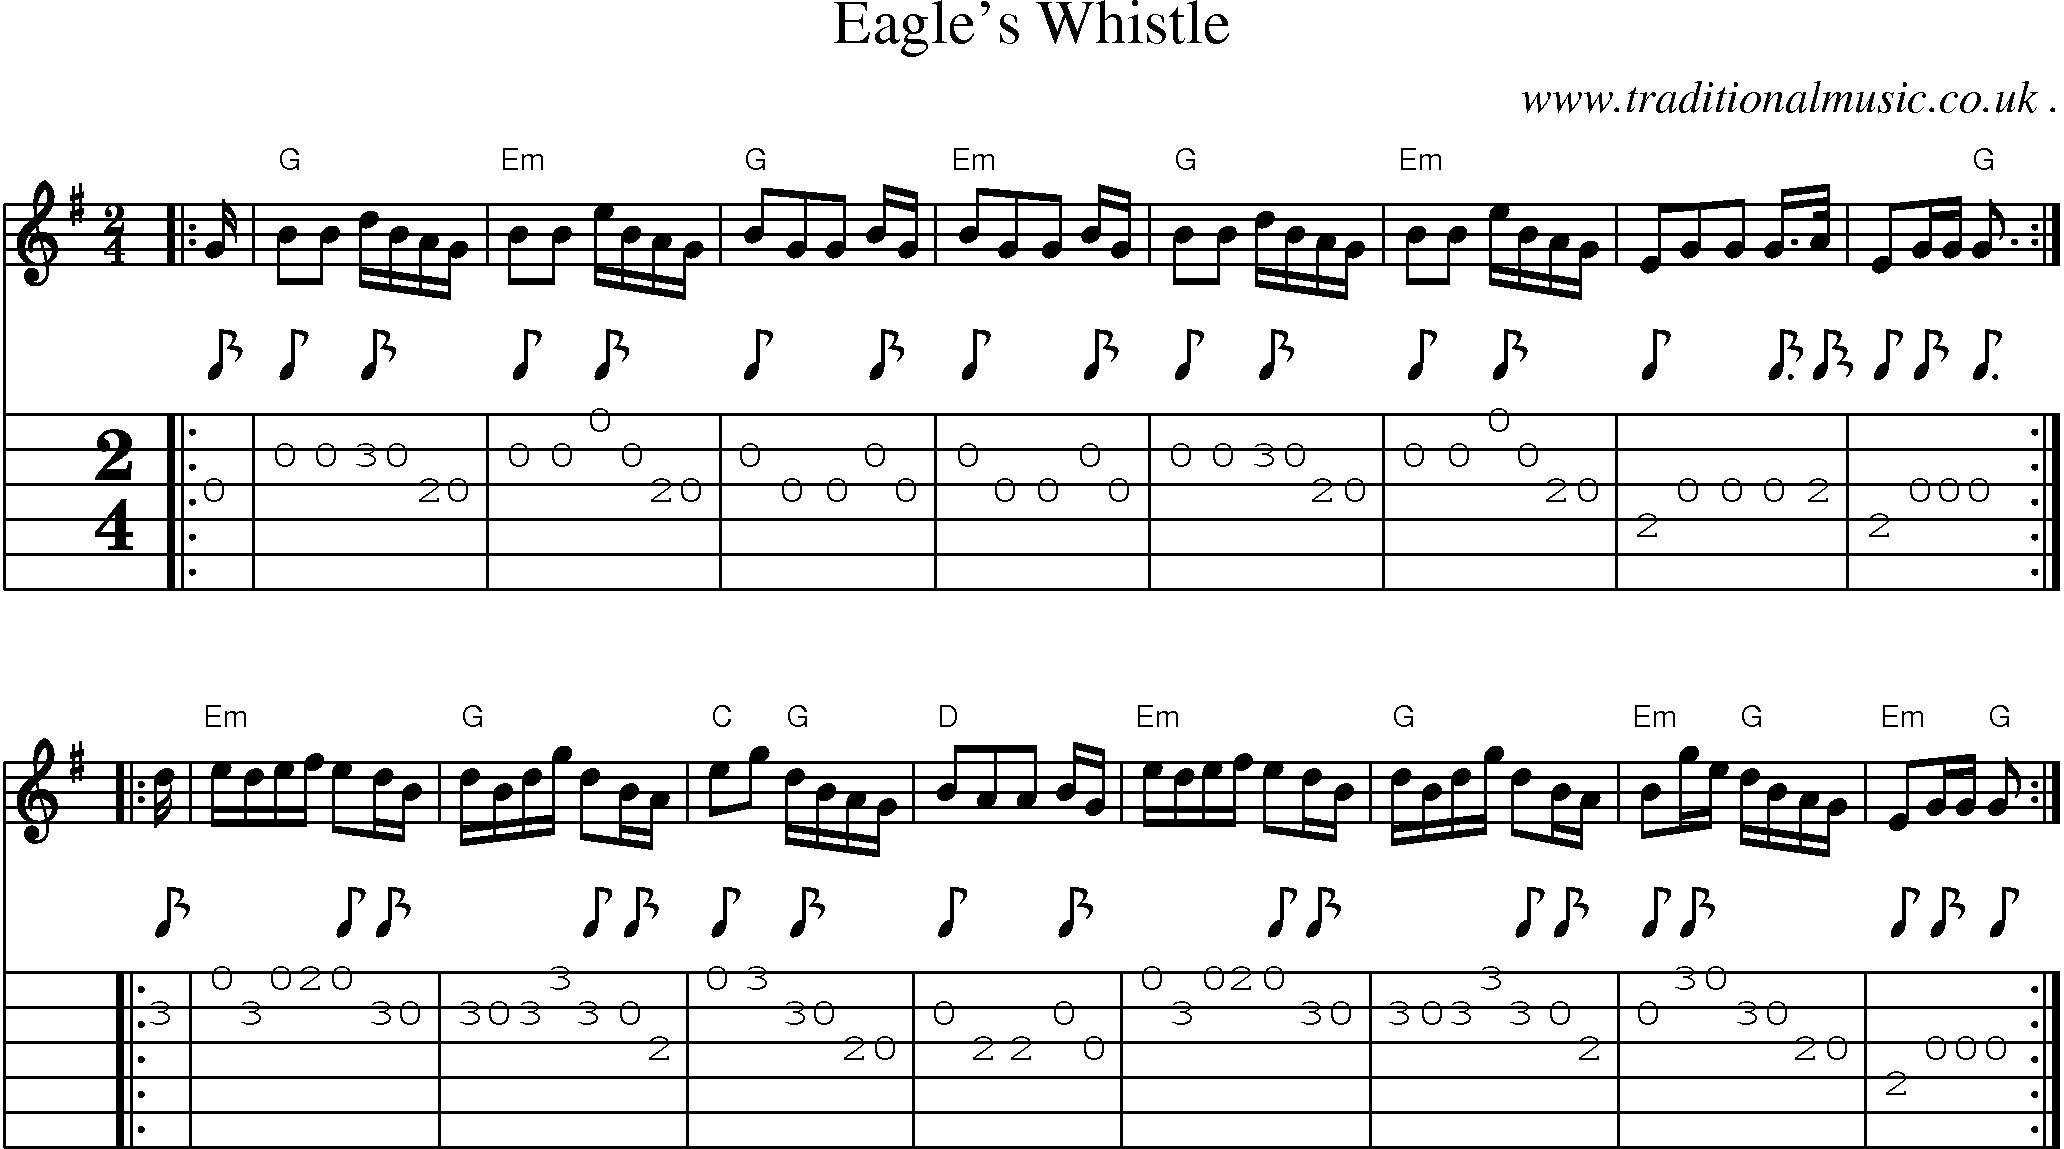 Music Score and Guitar Tabs for Eagles Whistle